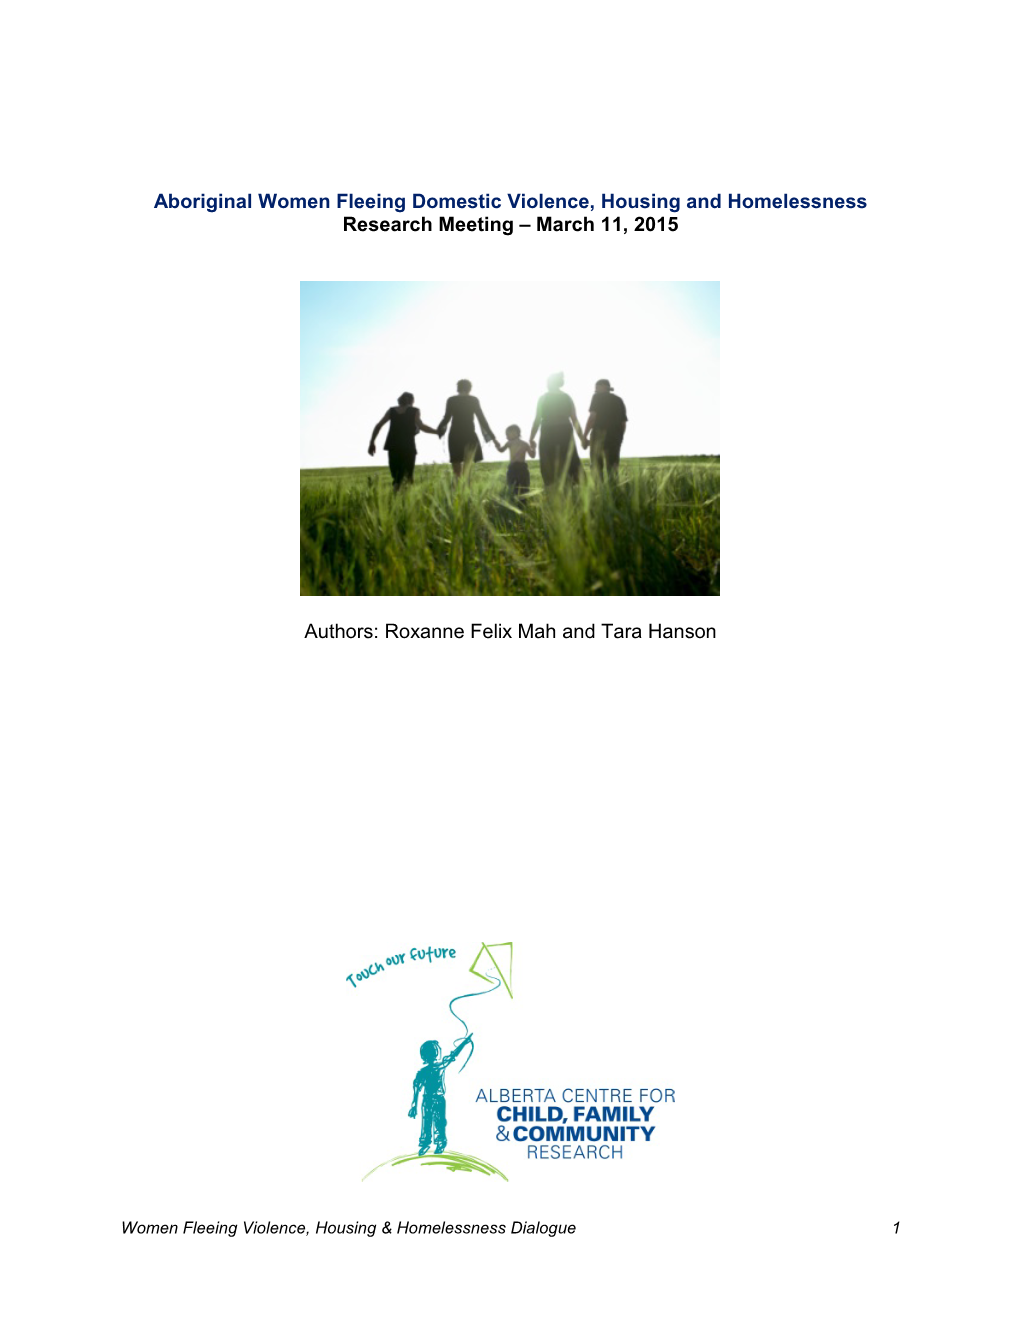 Aboriginal Women Fleeing Domestic Violence, Housing and Homelessness Research Meeting – March 11, 2015